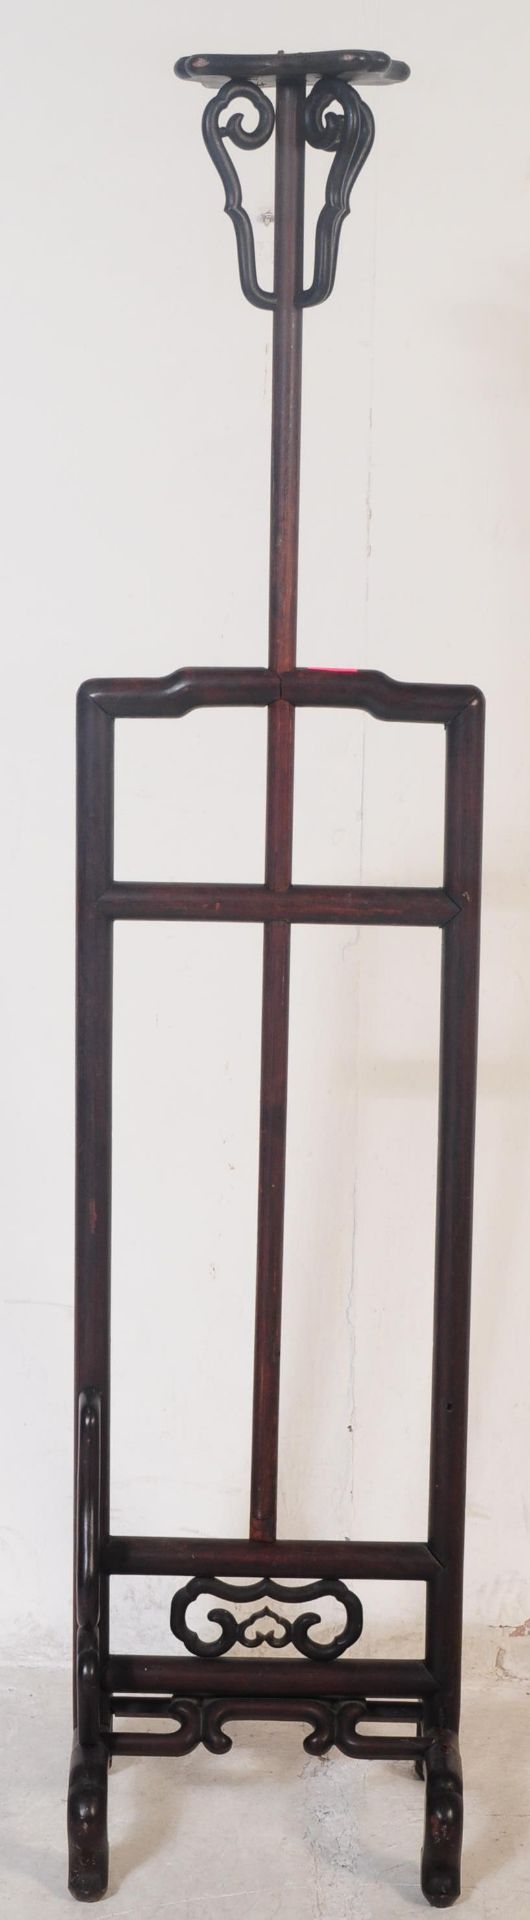 VINTAGE 20TH CENTURY CARVED CHINESE FLOOR STANDING LAMP - Image 2 of 6